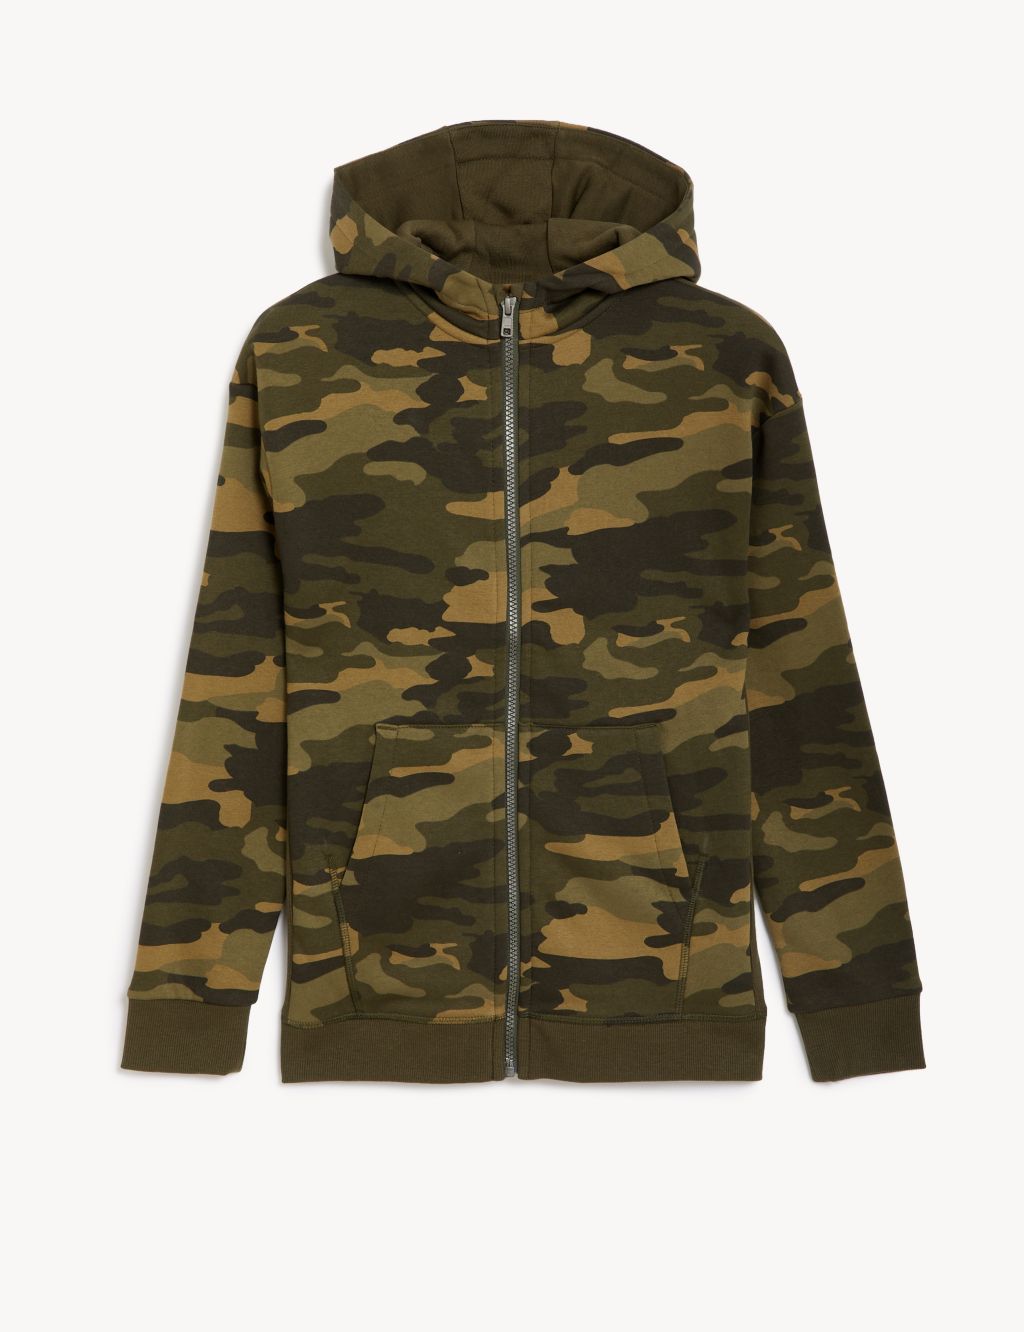 Cotton Rich Camouflage Zip Hoodie (6-16 Yrs) image 2